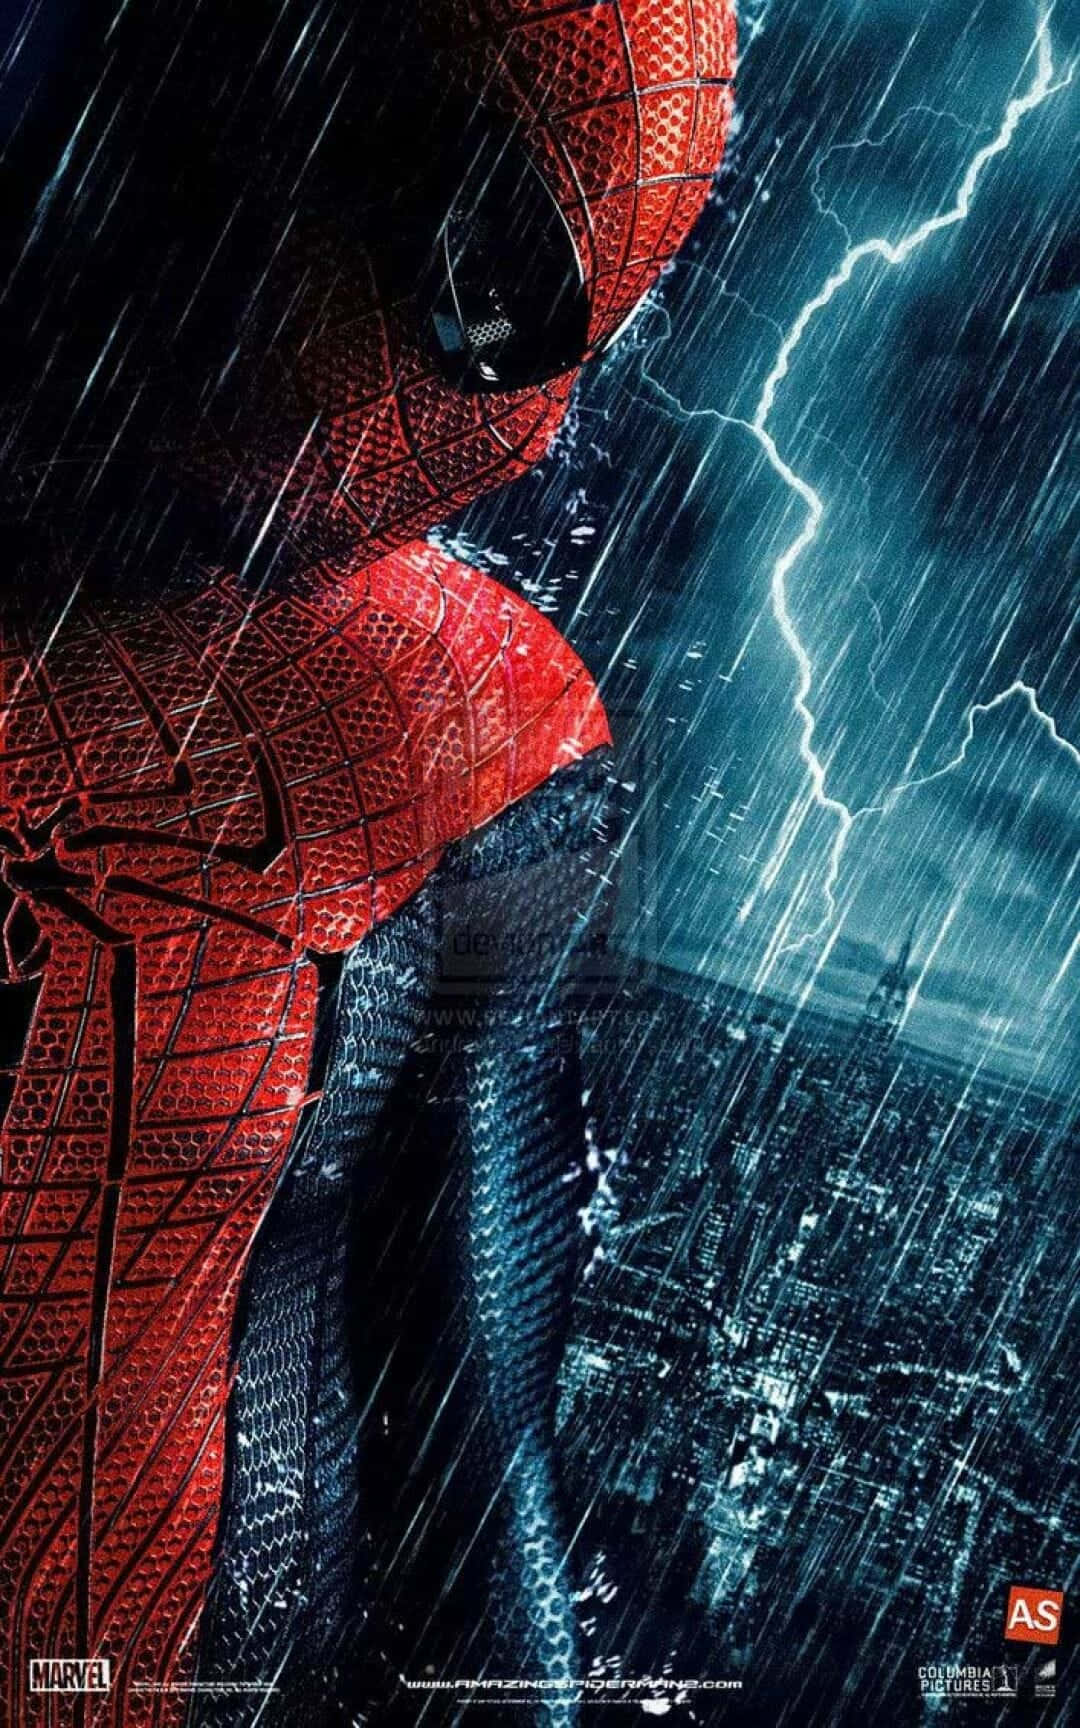 Get limitless entertainment with the Amazing Spider Man inspired iPhone Wallpaper